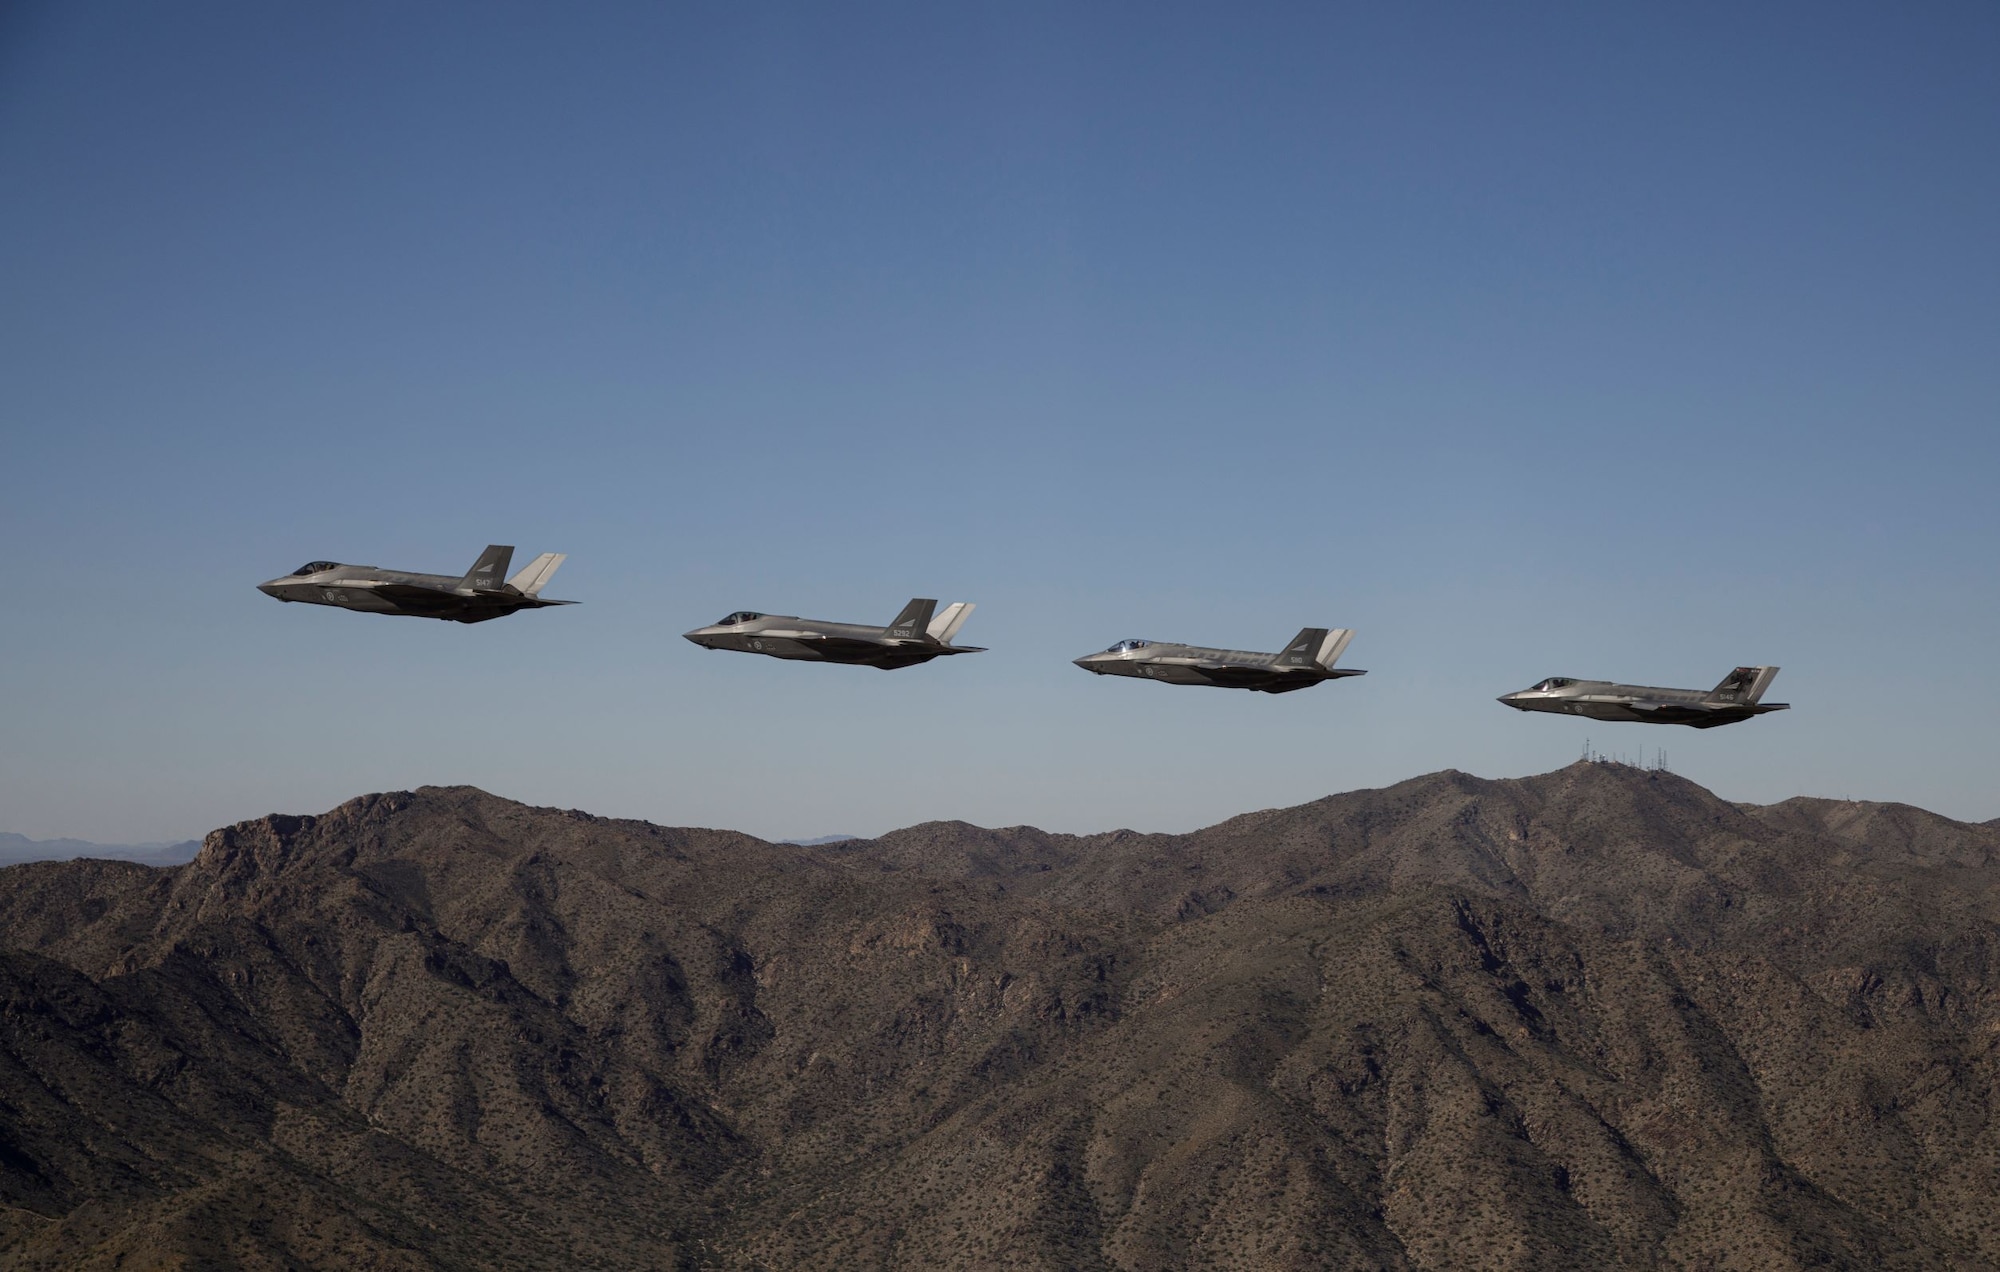 Four Royal Norwegian Air Force F-35 Lightning II aircraft fly in formation